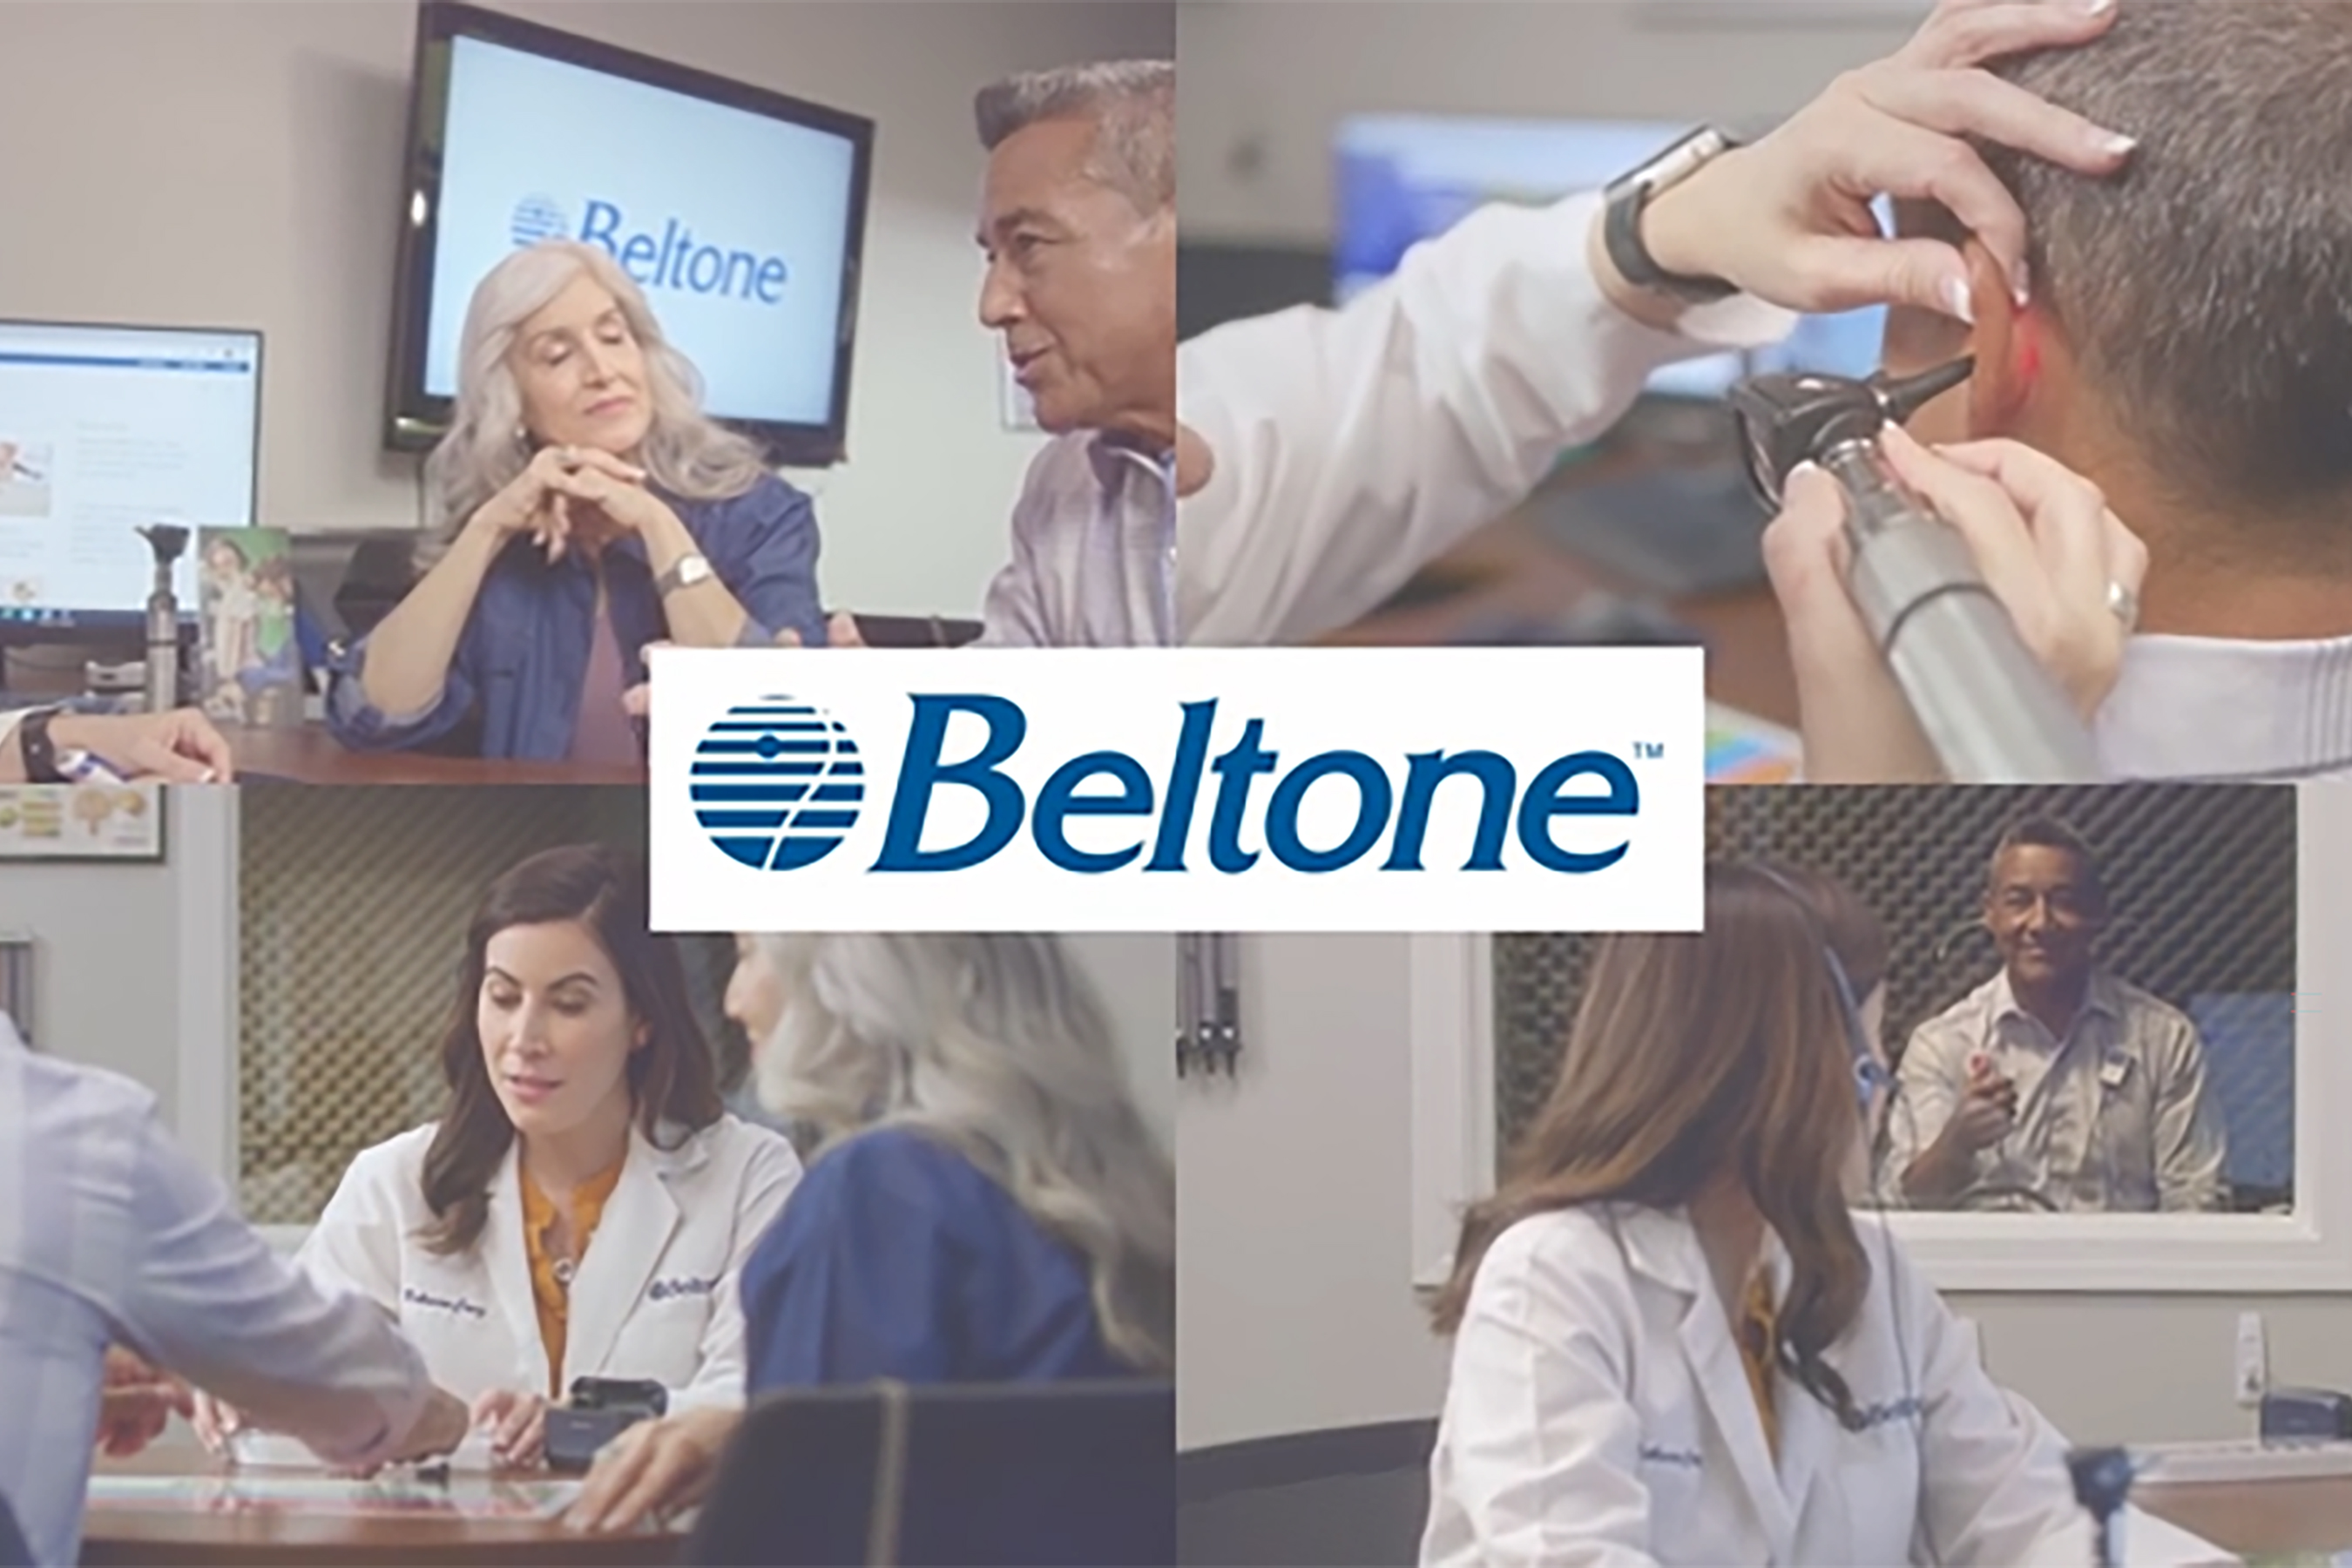 Play Video: “What to Expect During Your First Beltone Visit” Video